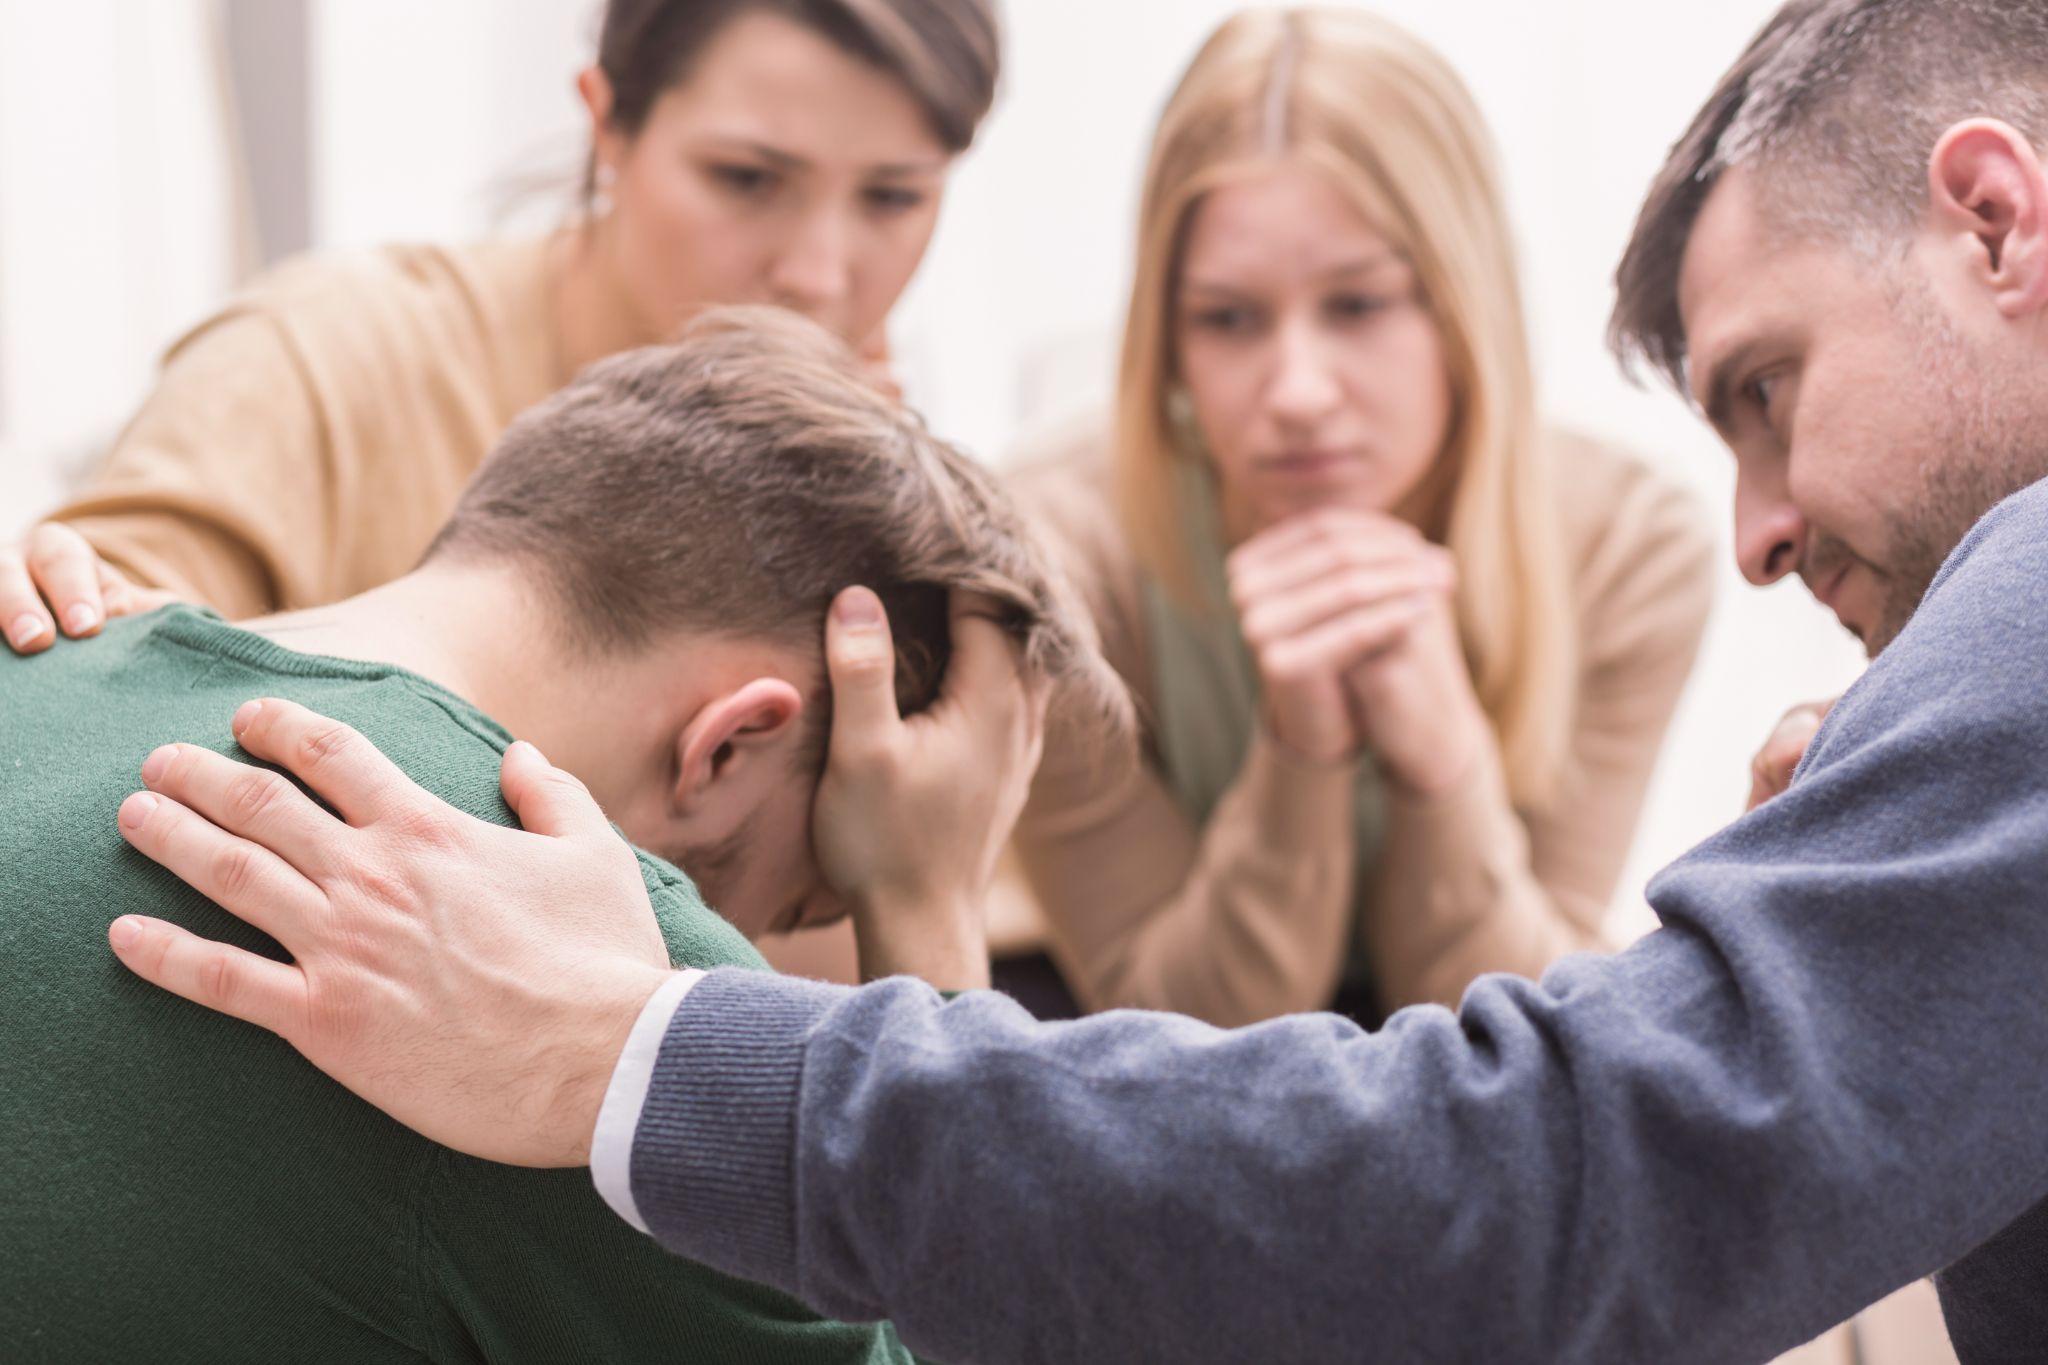 Devastated young man holding his head in his hands and friends supporting him during group therapy